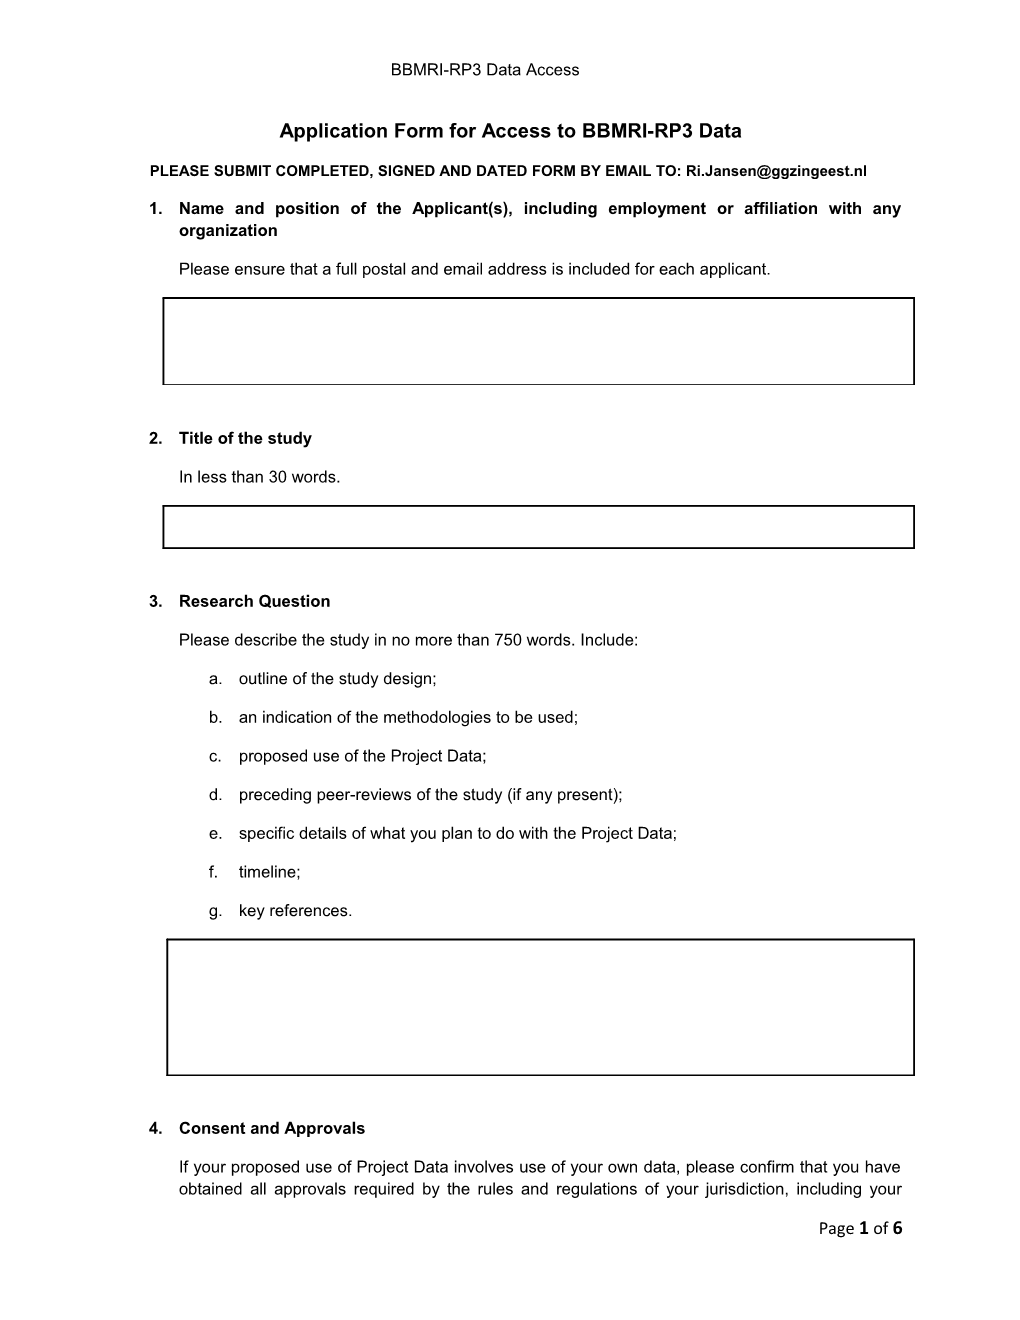 Application Form for Access to BBMRI-RP3 Data